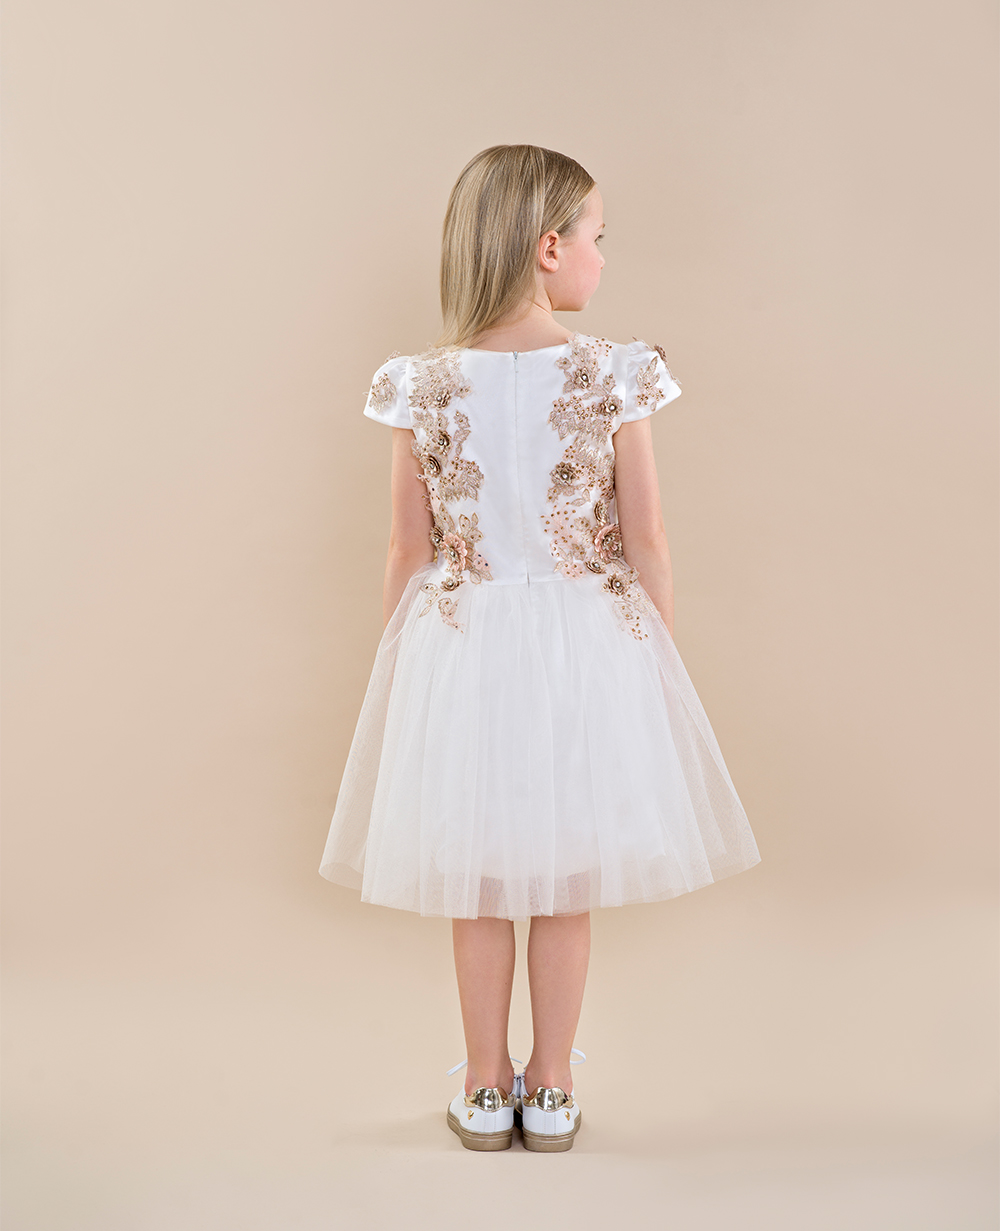 White and Pink Wedding Dress White Lace Dress Short Sleeve Tulle skirt